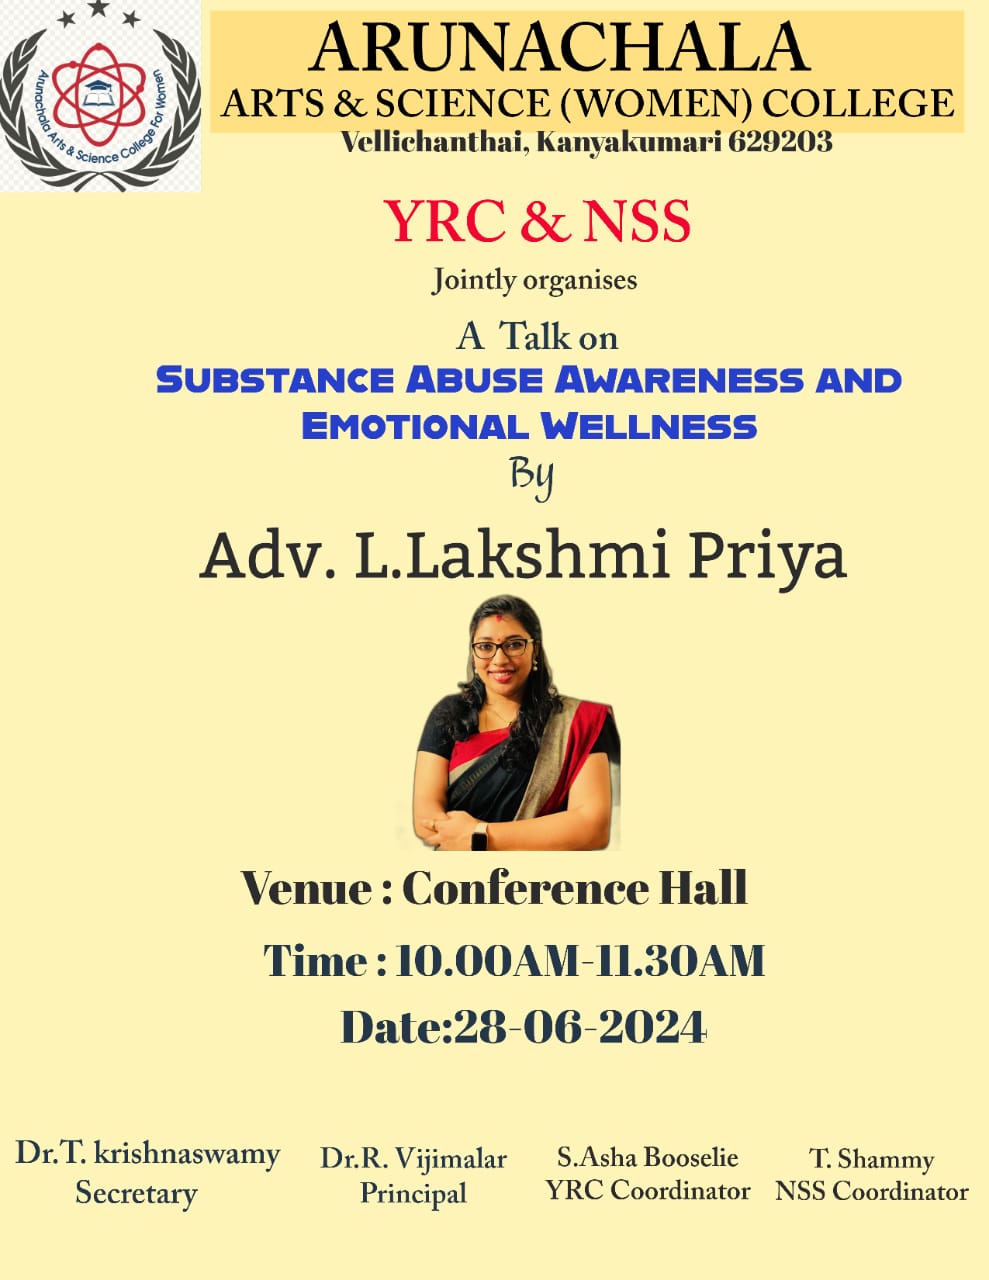 YRC & NSS jointly organised a talk on Substance Abuse Awareness and Emotional Wellness